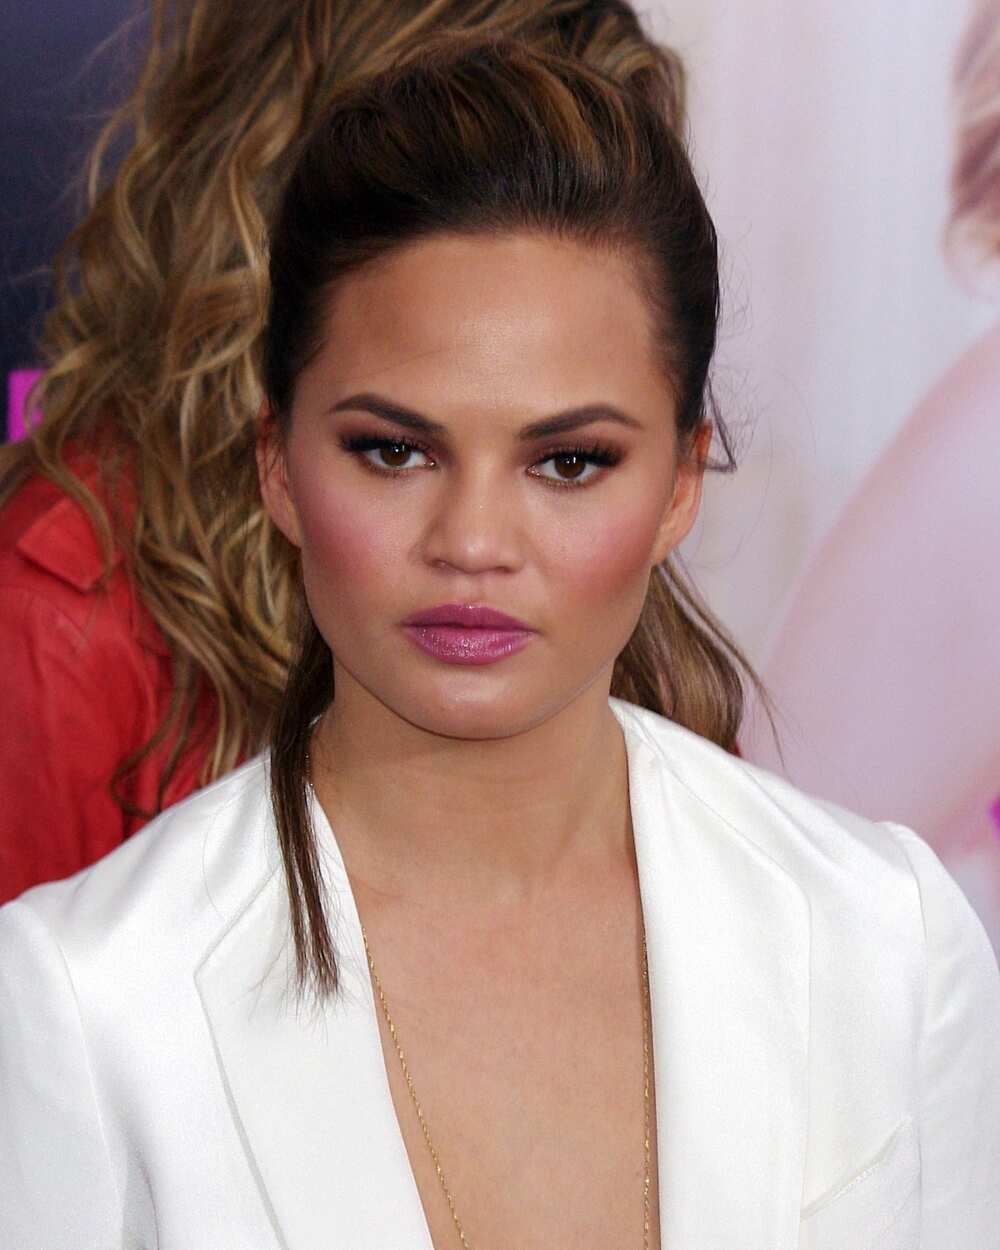 Chrissy Teigen opens up about her miscarriage